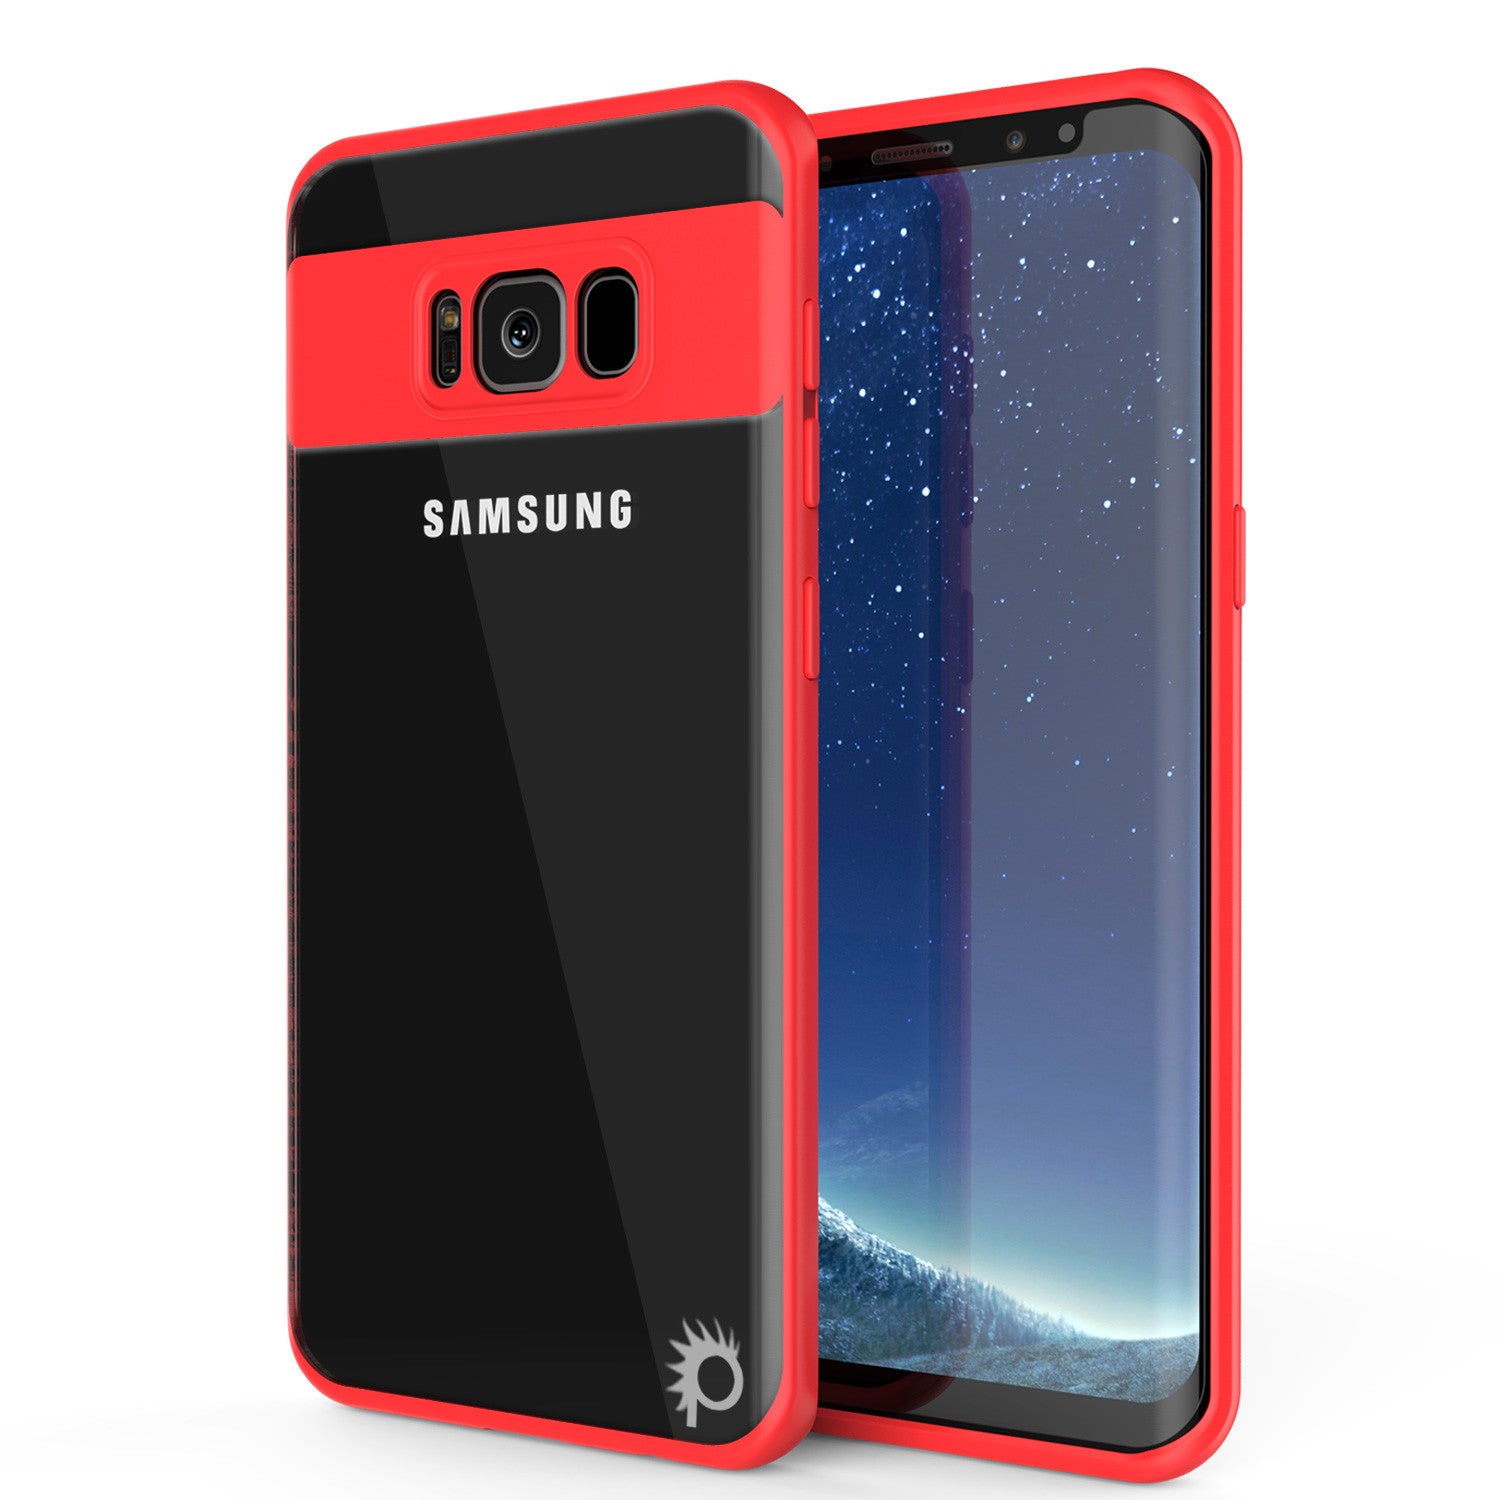 Galaxy S8 Case, Punkcase [MASK Series] [RED] Full Body Hybrid Dual Layer TPU Cover W/ Protective PUNKSHIELD Screen Protector